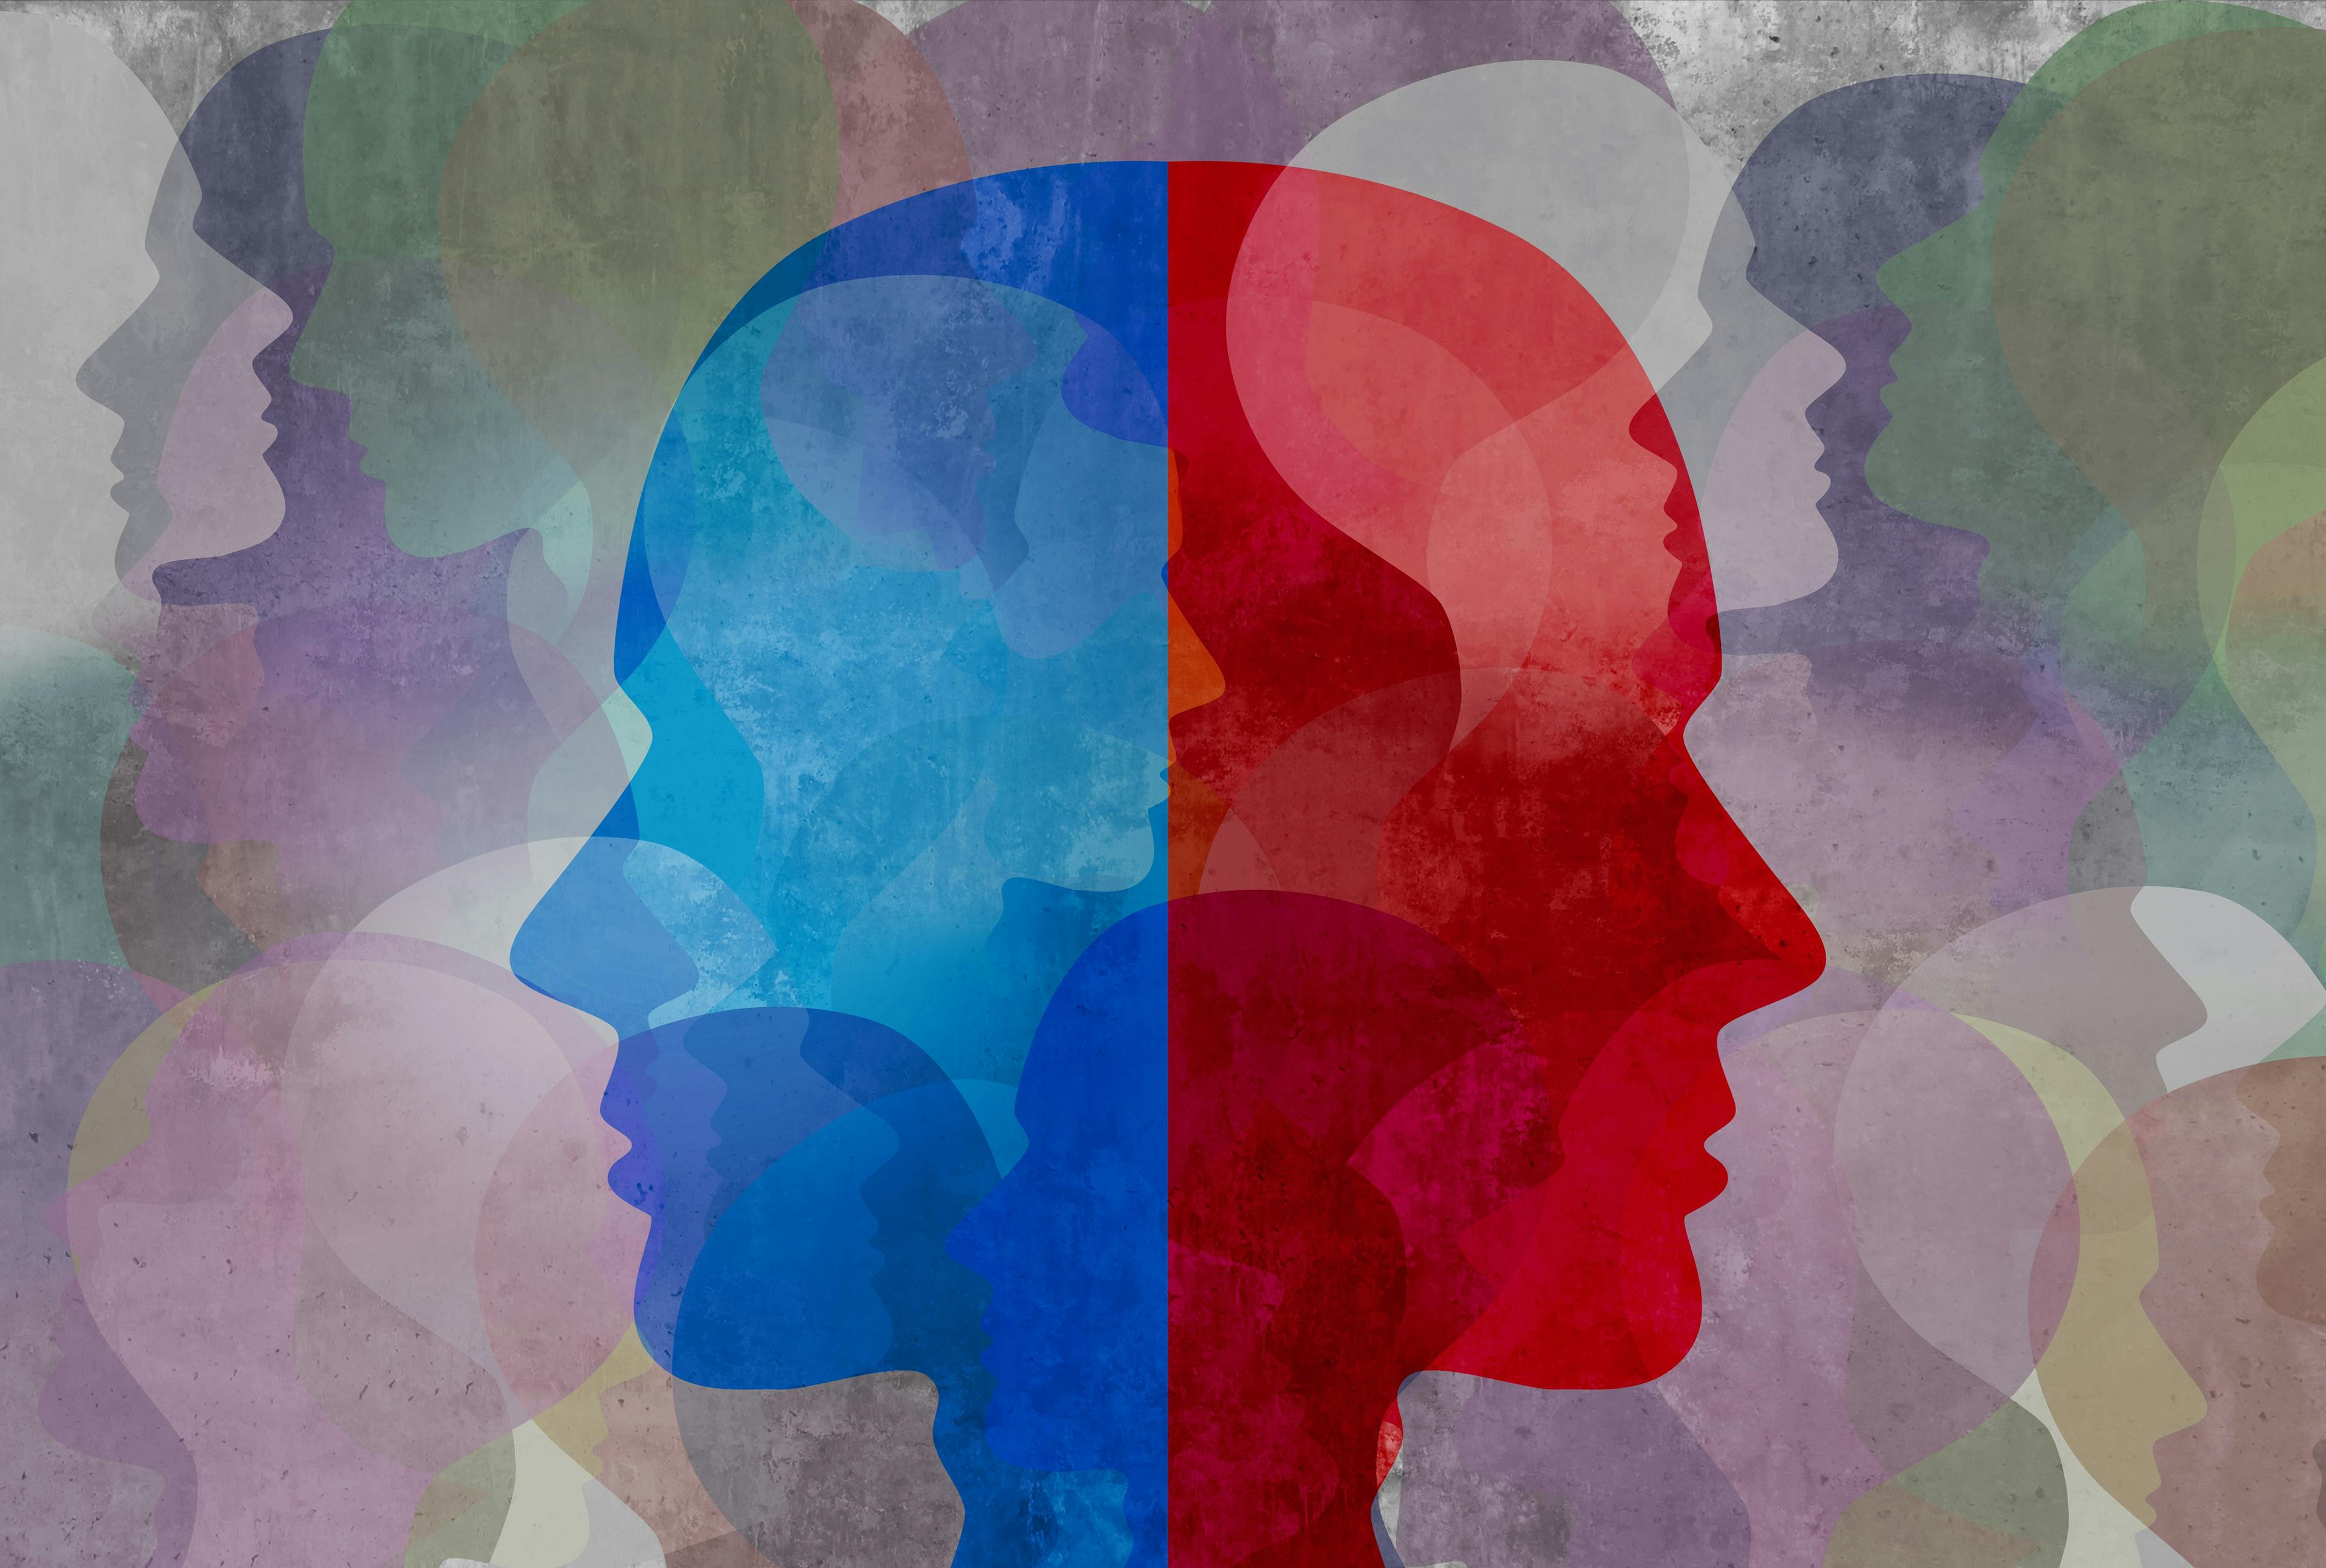 Exploring Treatment Options for Patients with Treatment-Resistant Schizophrenia